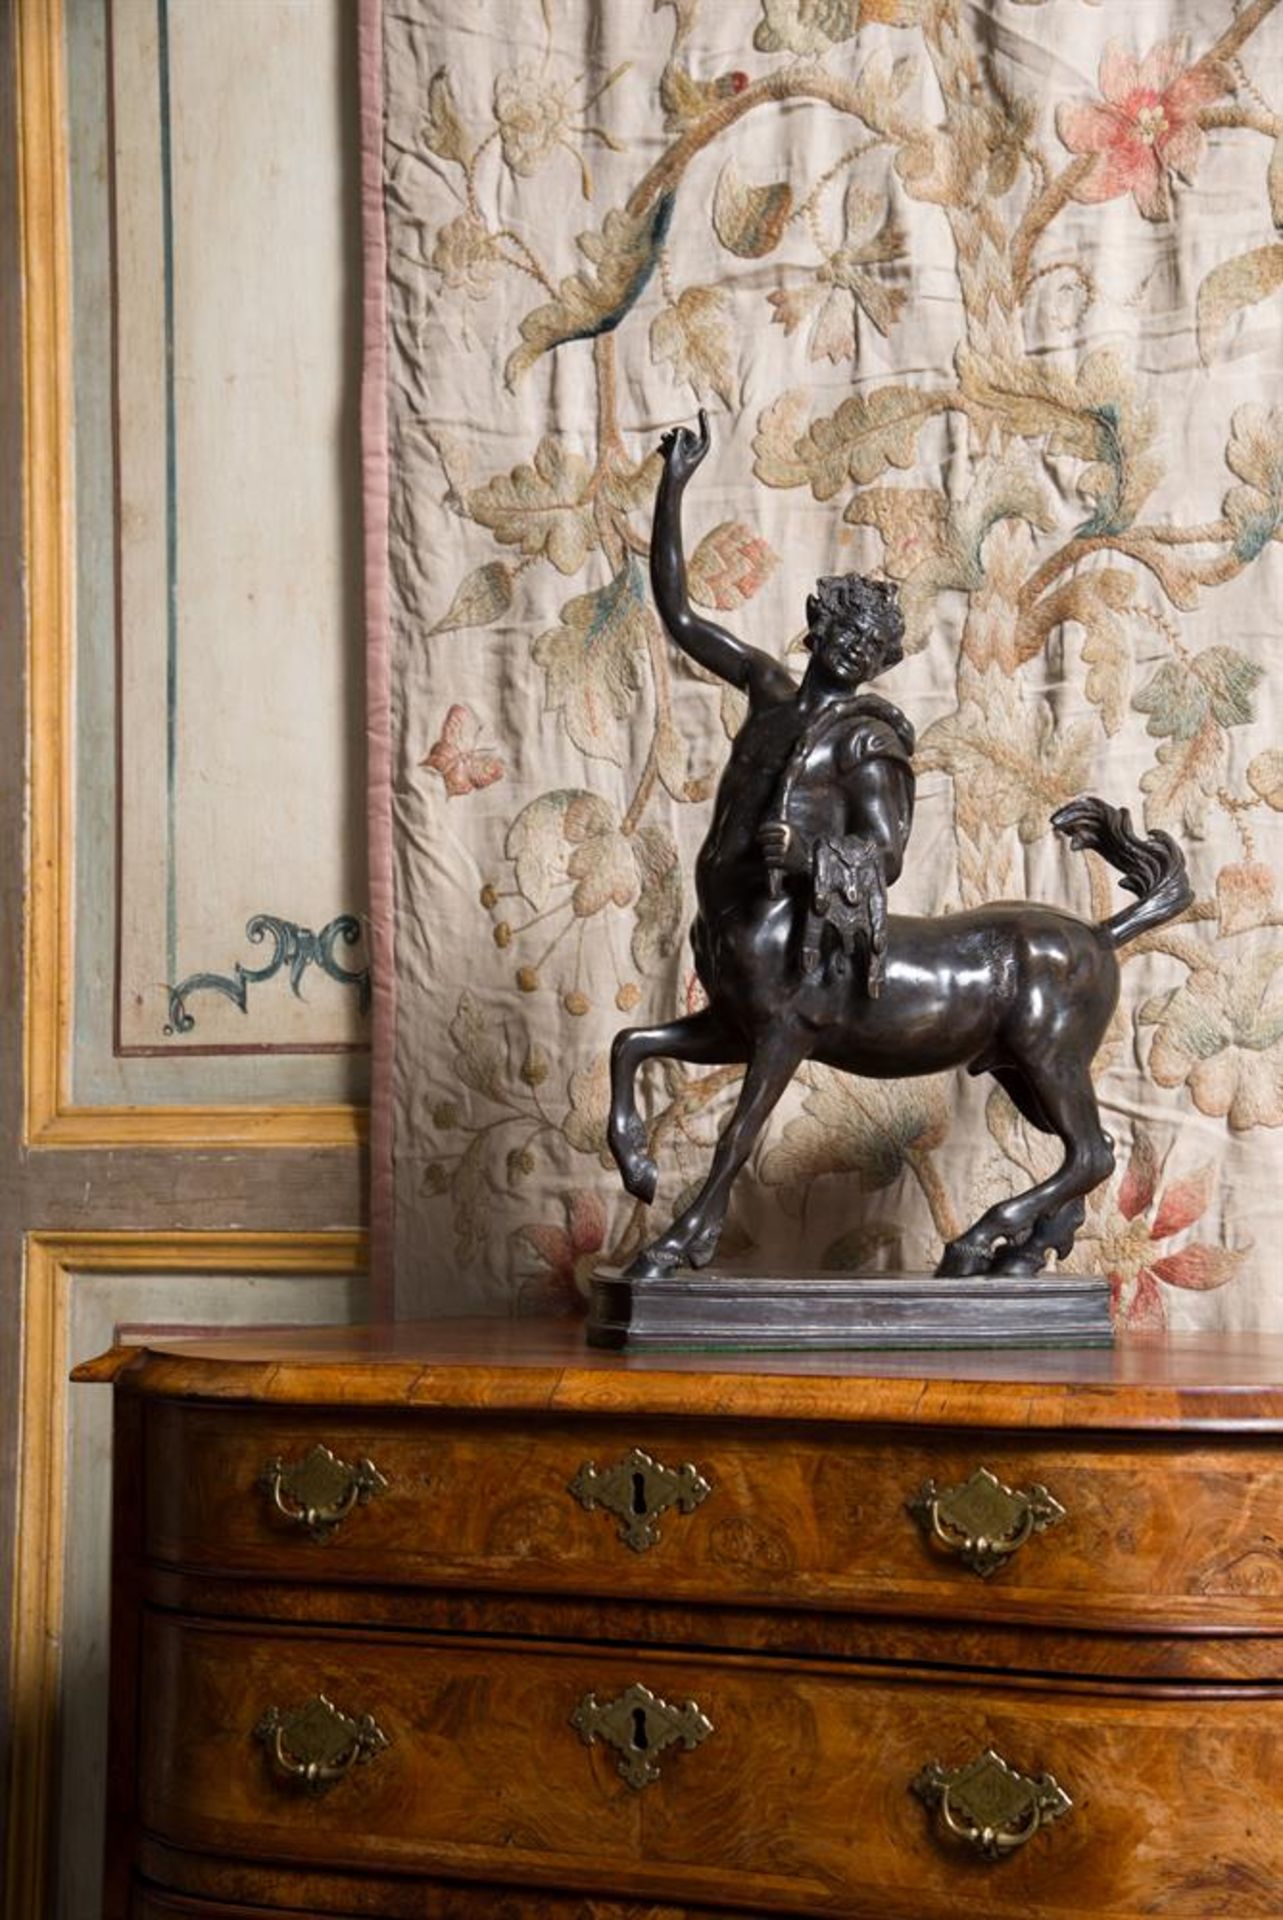 AFTER THE ANTIQUE, A LARGE GRAND TOUR BRONZE OF THE FURIETTI CENTAUR ITALIAN